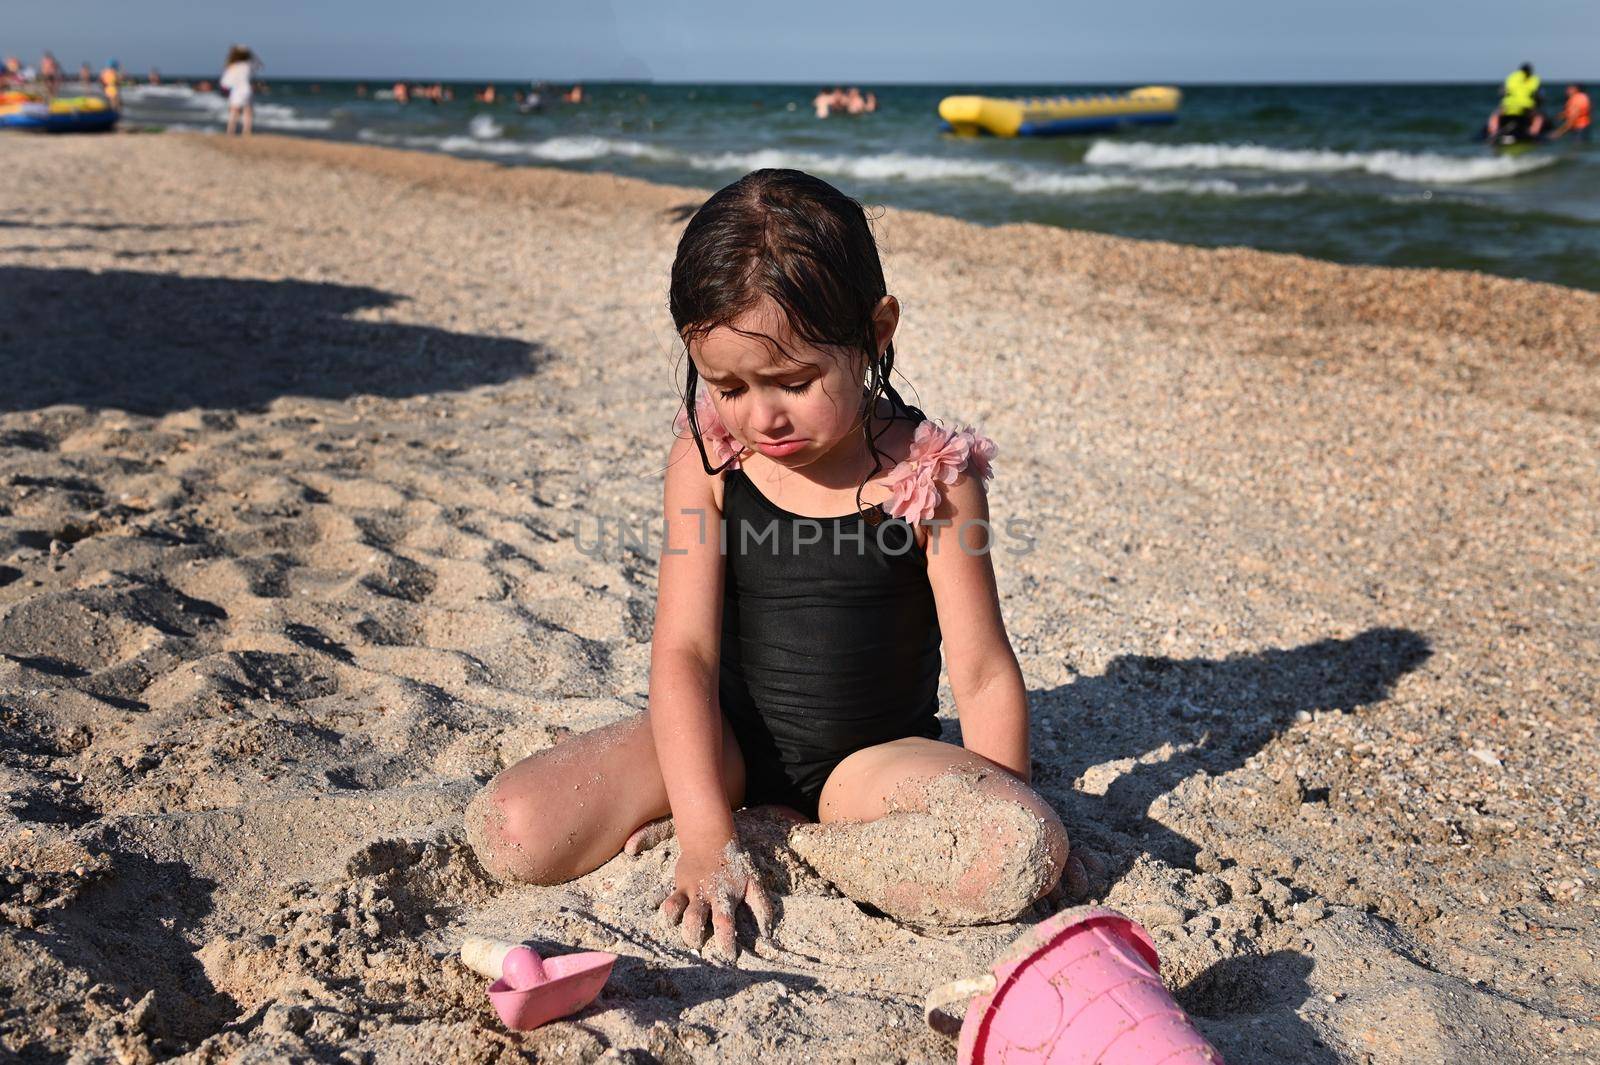 Summer holidays concept. Active lifestyles and happy summer vacations. Summer vacation. Adorable toddler girl playing with beach toys on the sandy beach.